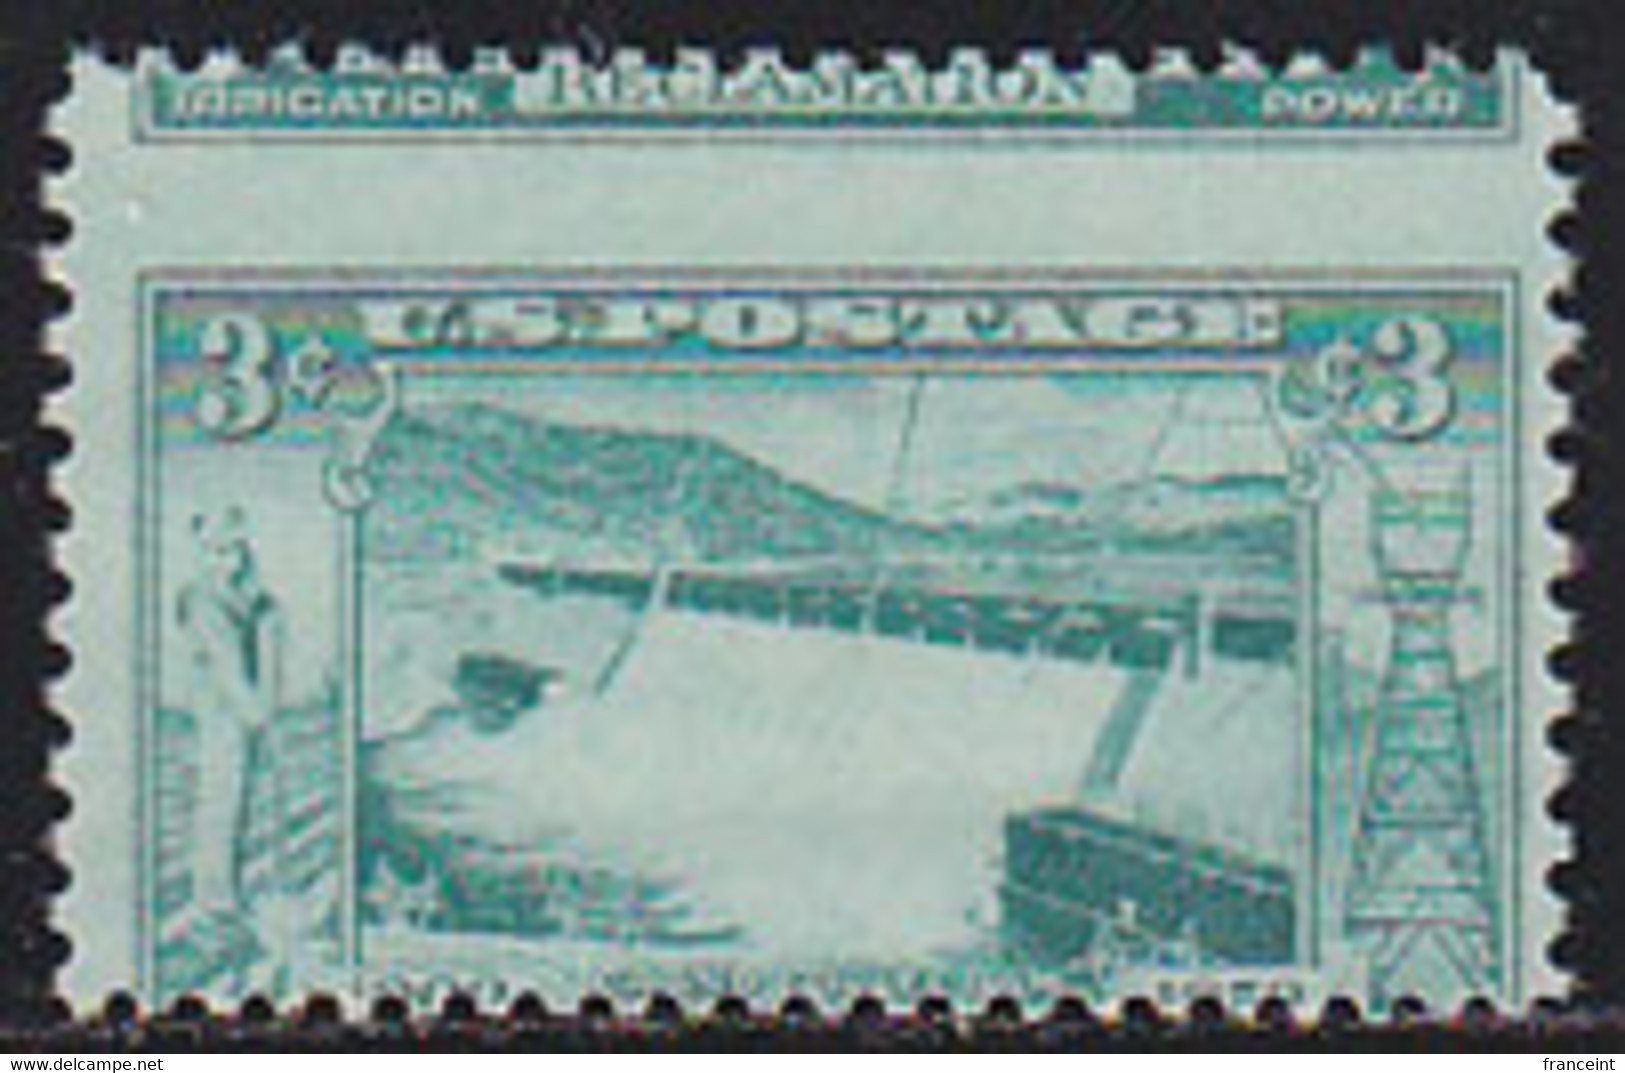 U.S.A. (1952) Grand Coulee Dam. Misperforation Resulting In Bottom Of Stamp Appearing At Top. Scott No 1009 - Errors, Freaks & Oddities (EFOs)